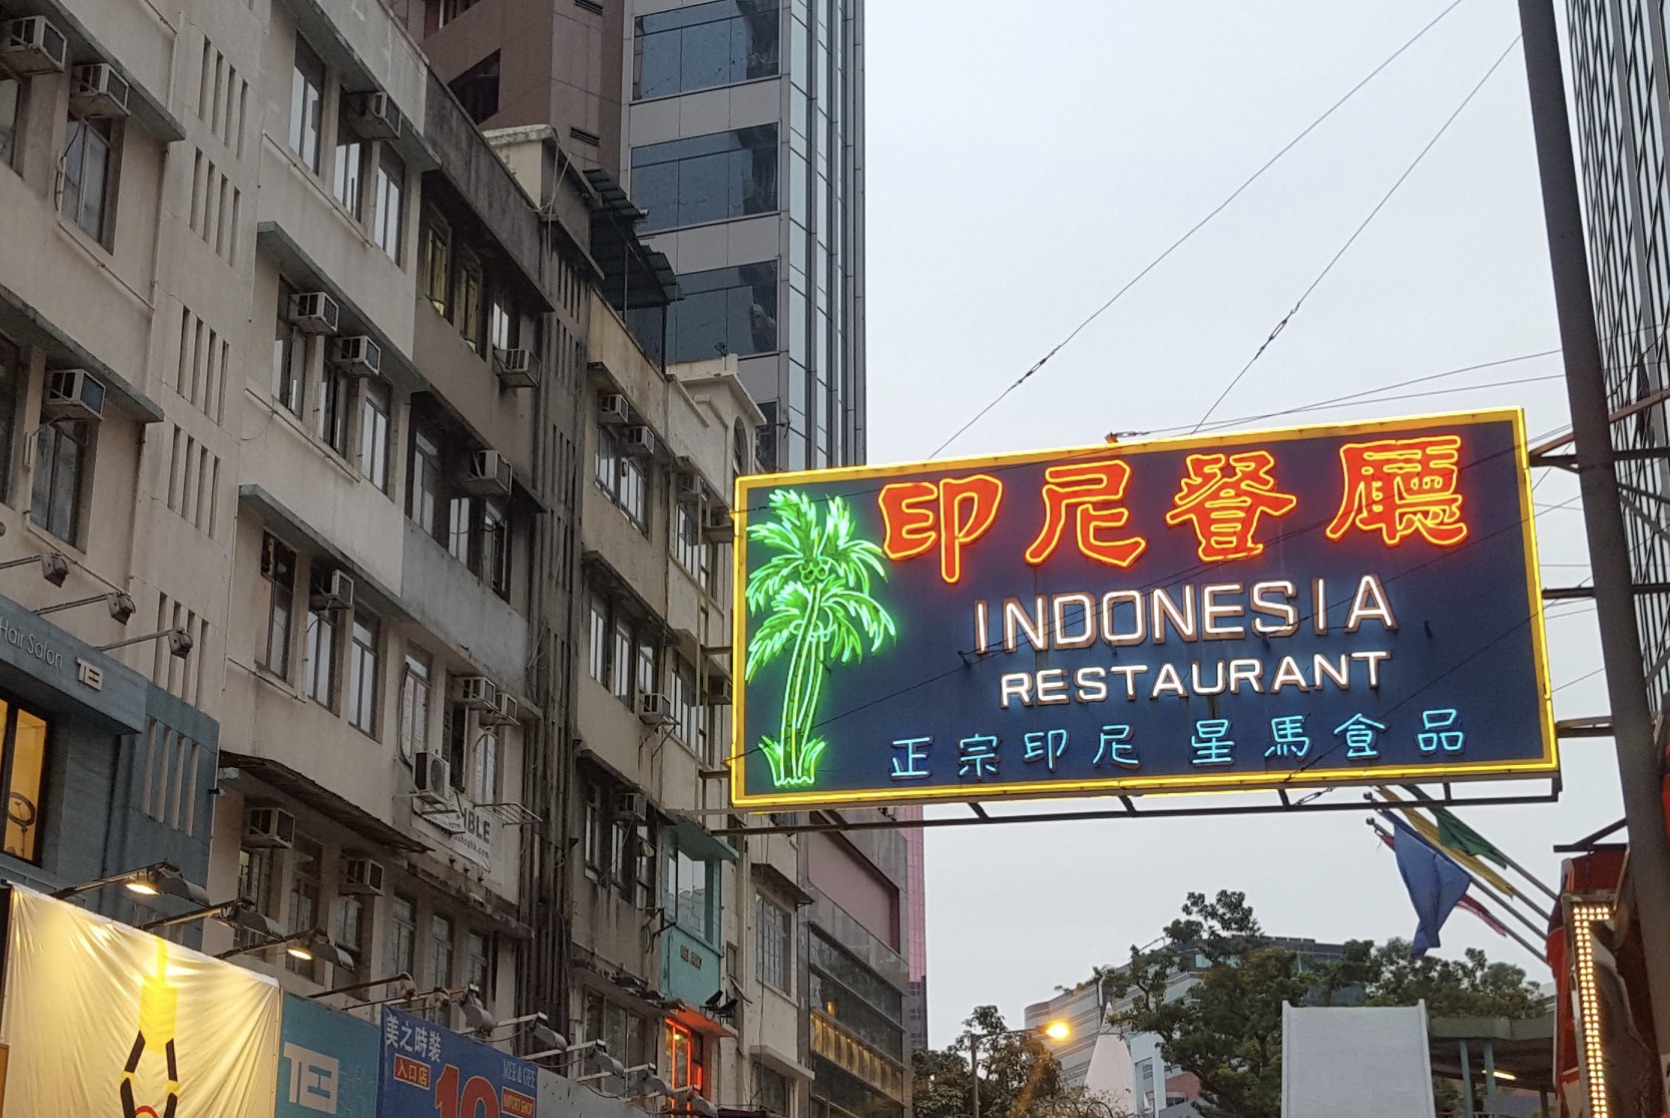 The iconic neon sign for the Indonesia Restaurant in Tsim Sha Tsui. Late last year the owners confirmed the business would close down, and the sign is now in temporary storage. Photo via Facebook/Neon Heritage.